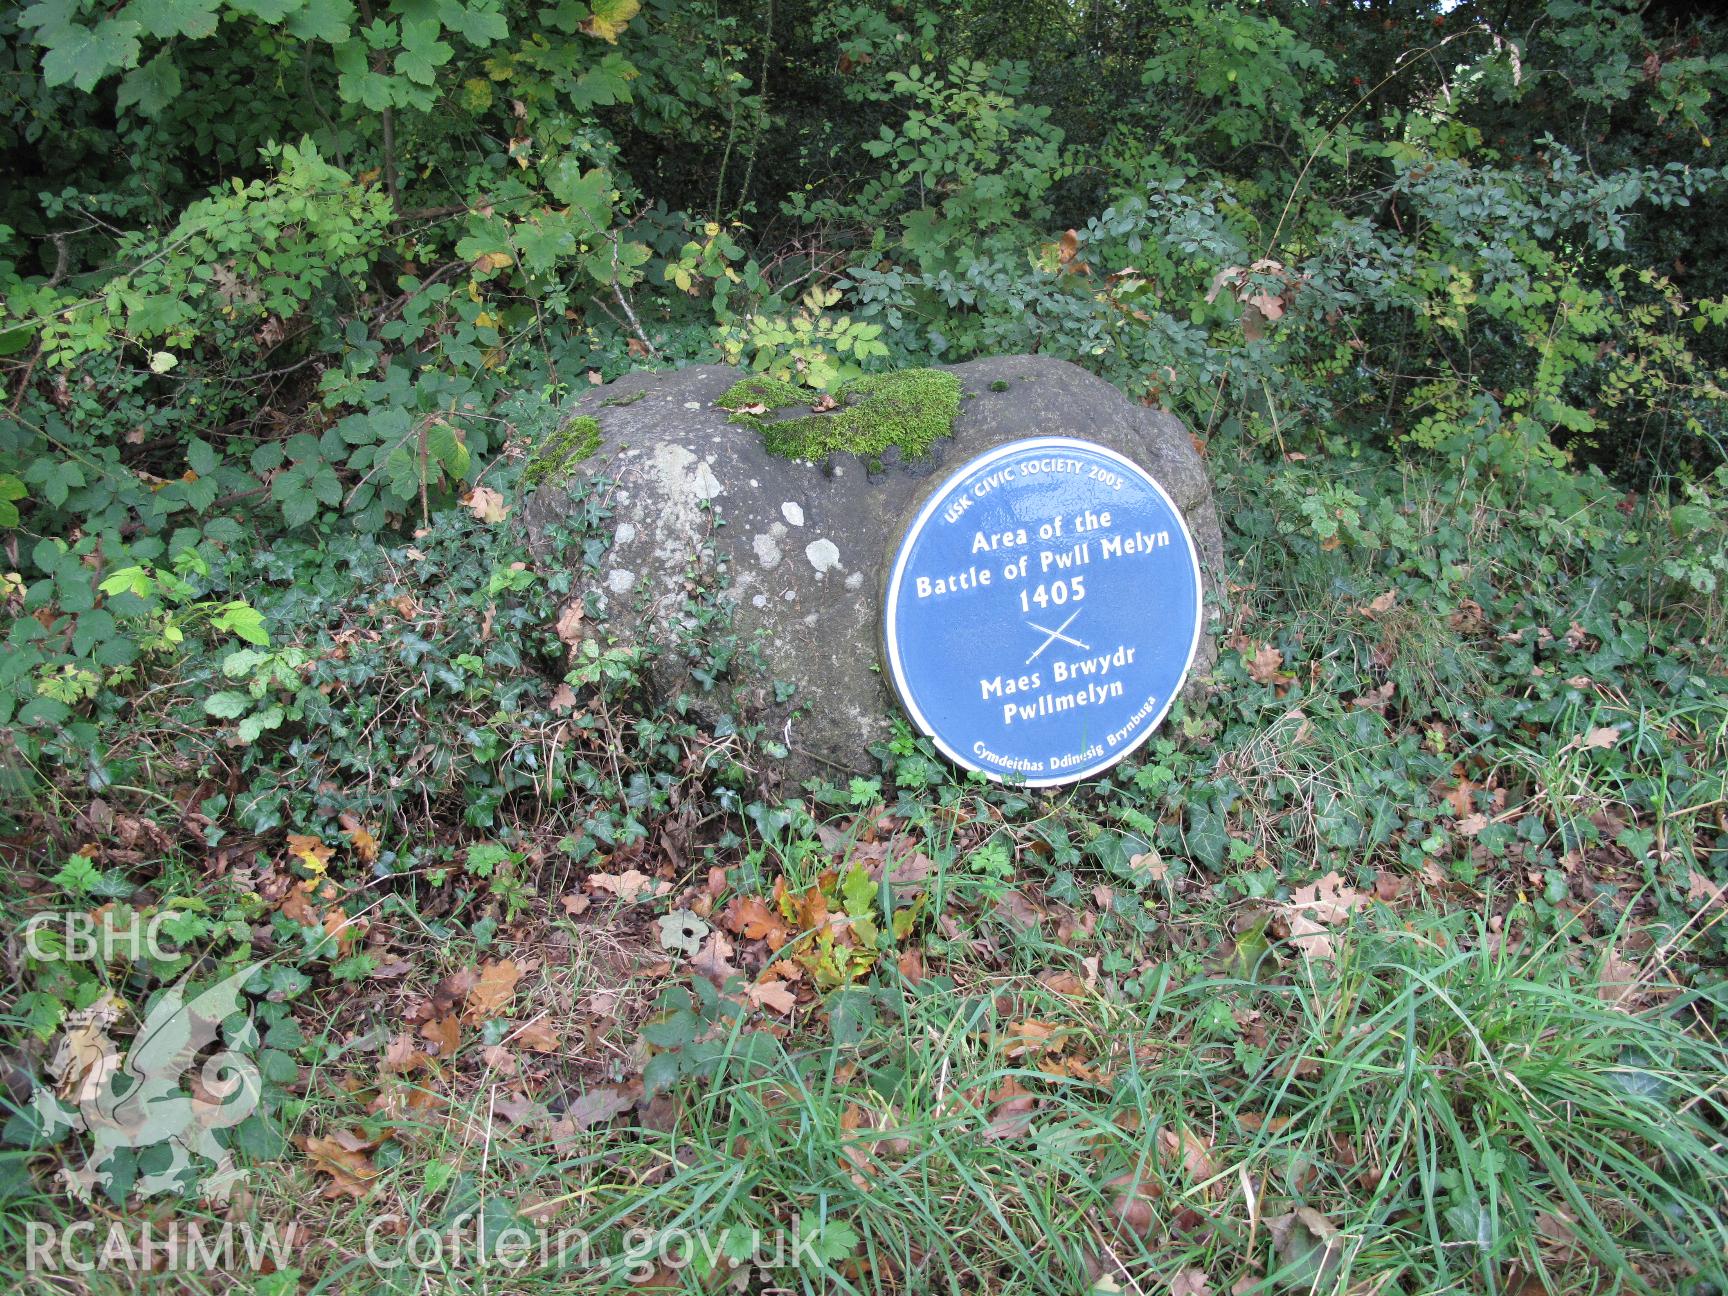 Monument commemorating the Battle of Pwll Melyn, Usk, taken by Brian Malaws on 26 September 2011.